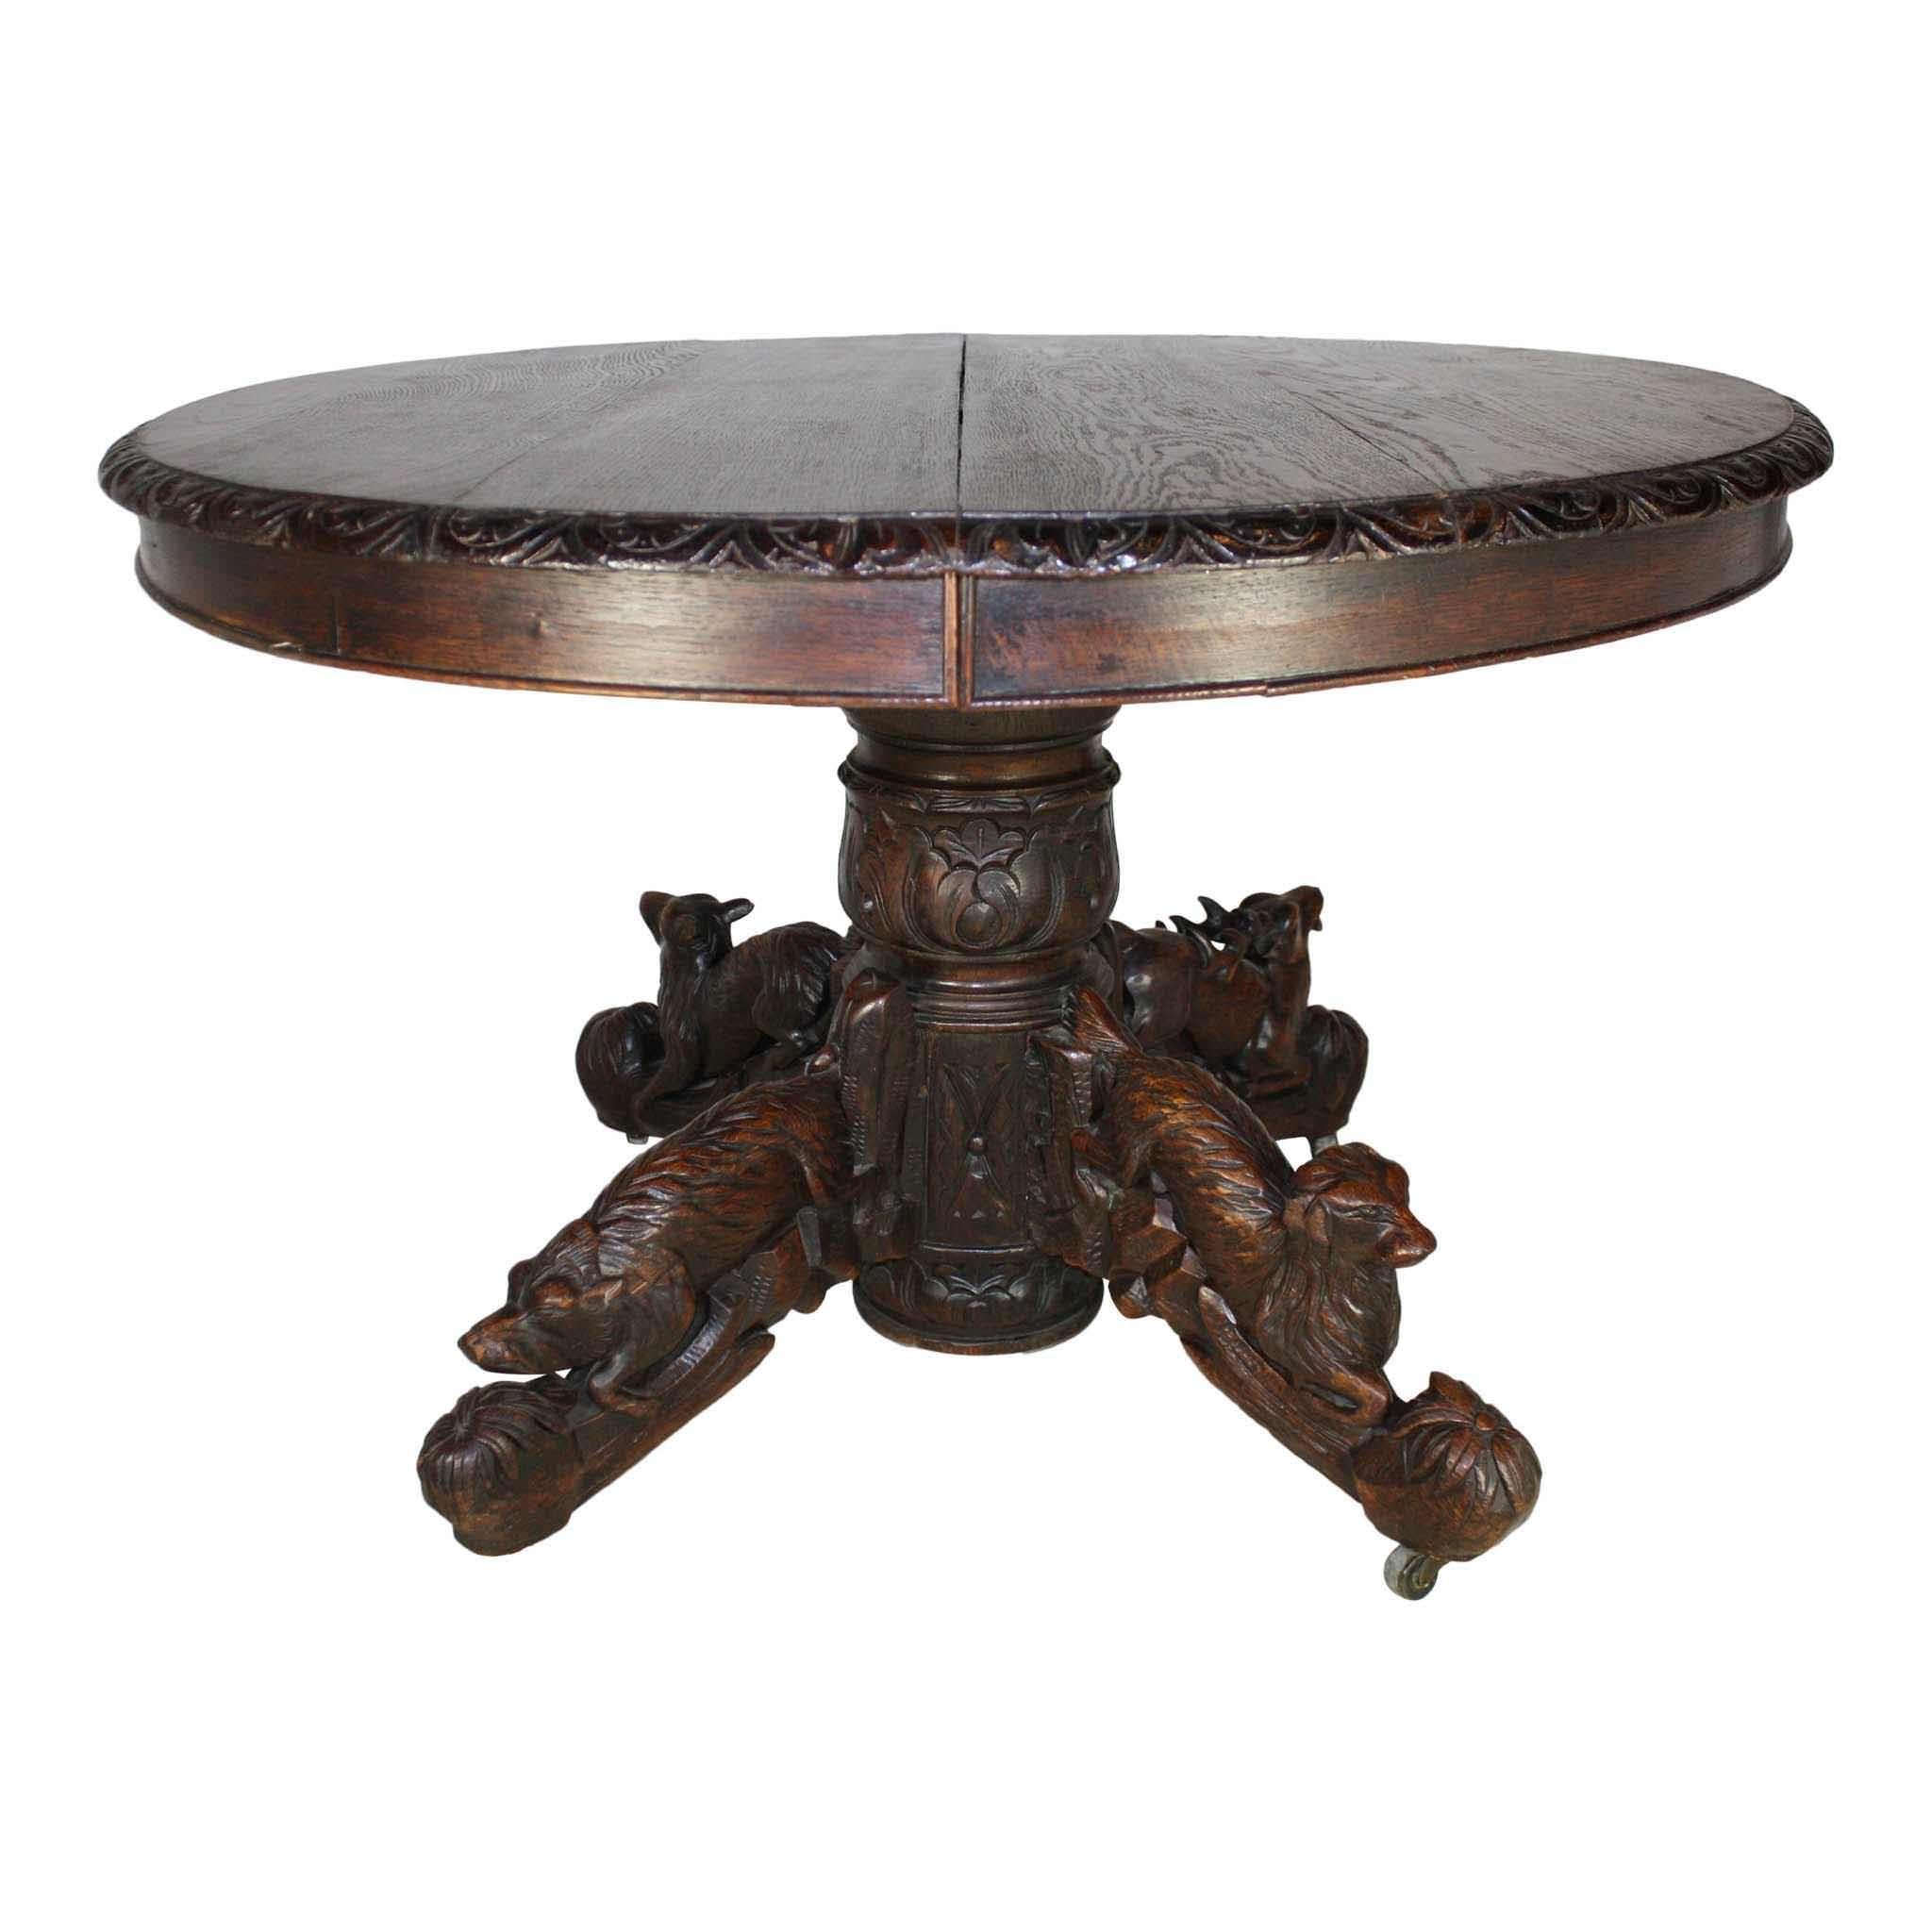 Prized alpine game and the loyal, hunting hound are depicted in detail on the feet of this French hunt table. Each foot has a different animal: stag, fox, boar, and dog. The table appears to have been designed to extend but has since been revised.